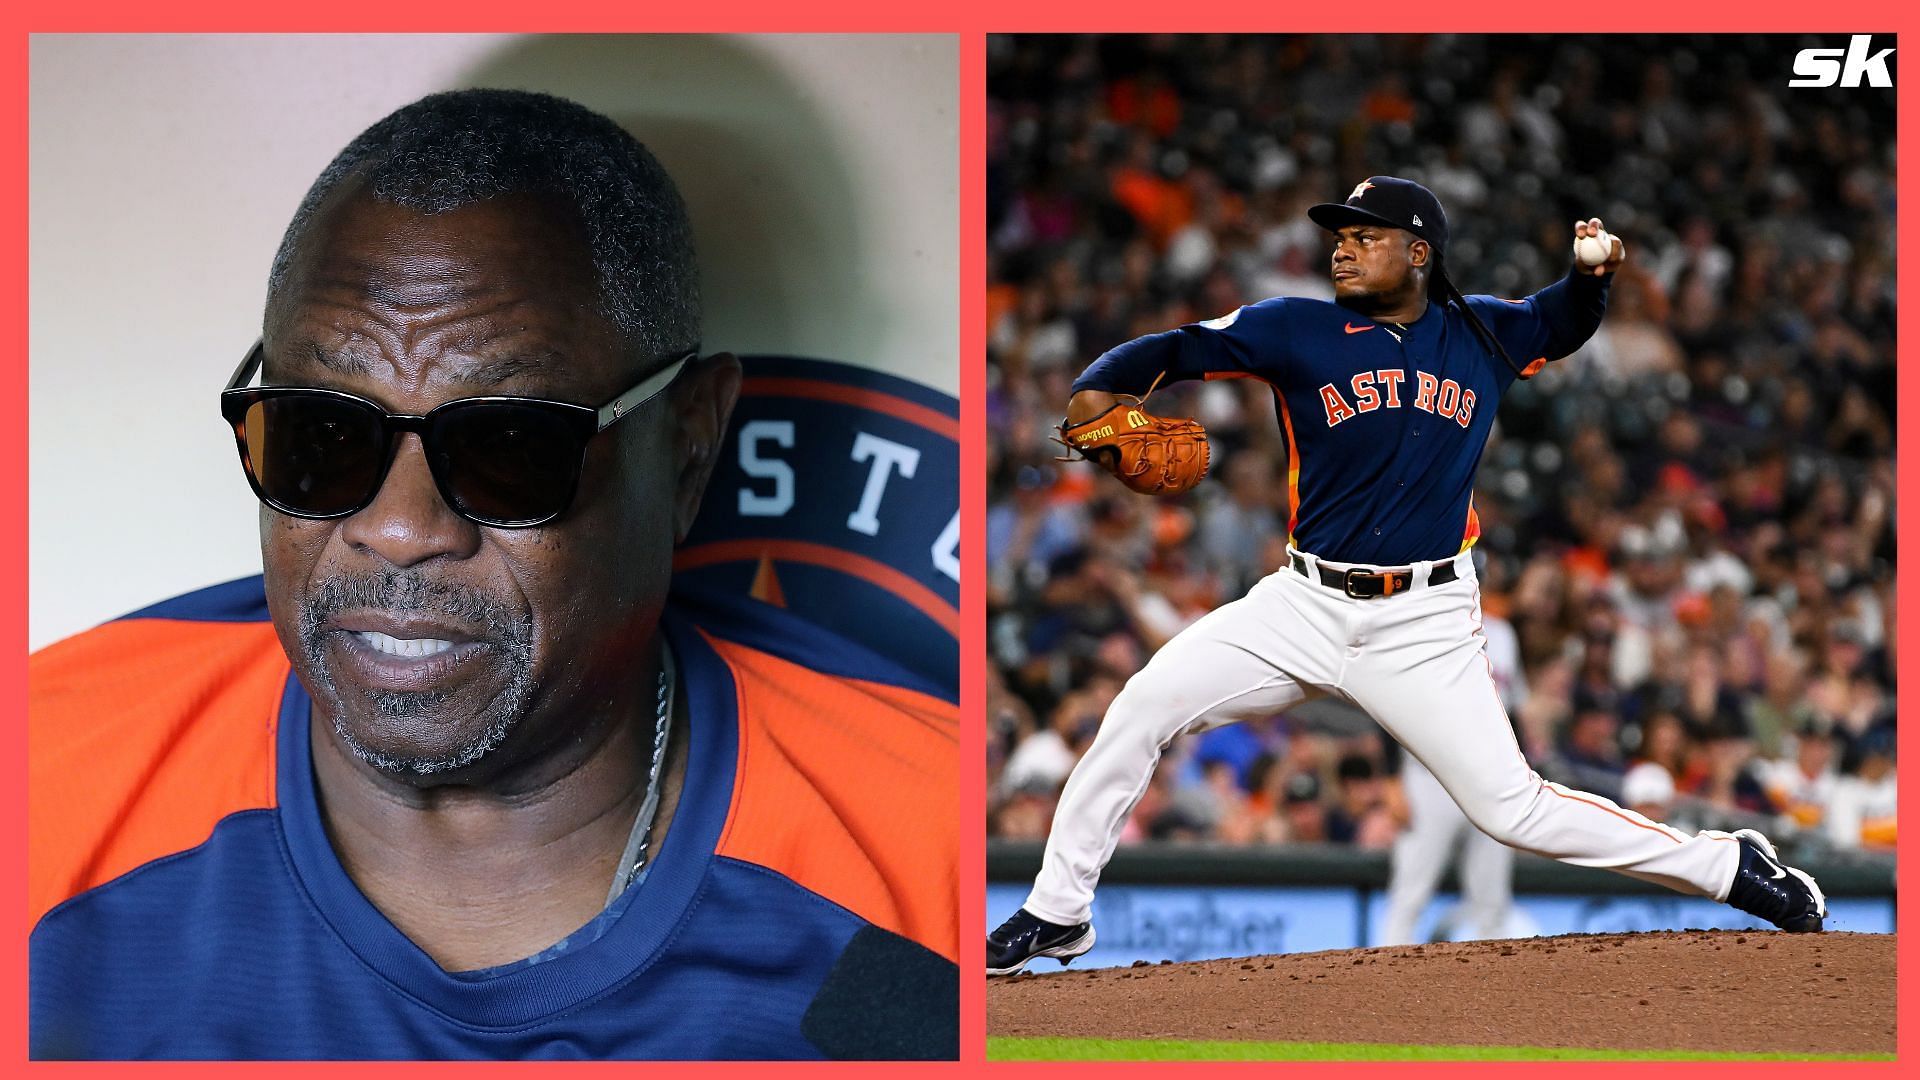 Astros manager Dusty Baker dazzly with Framber Valdez